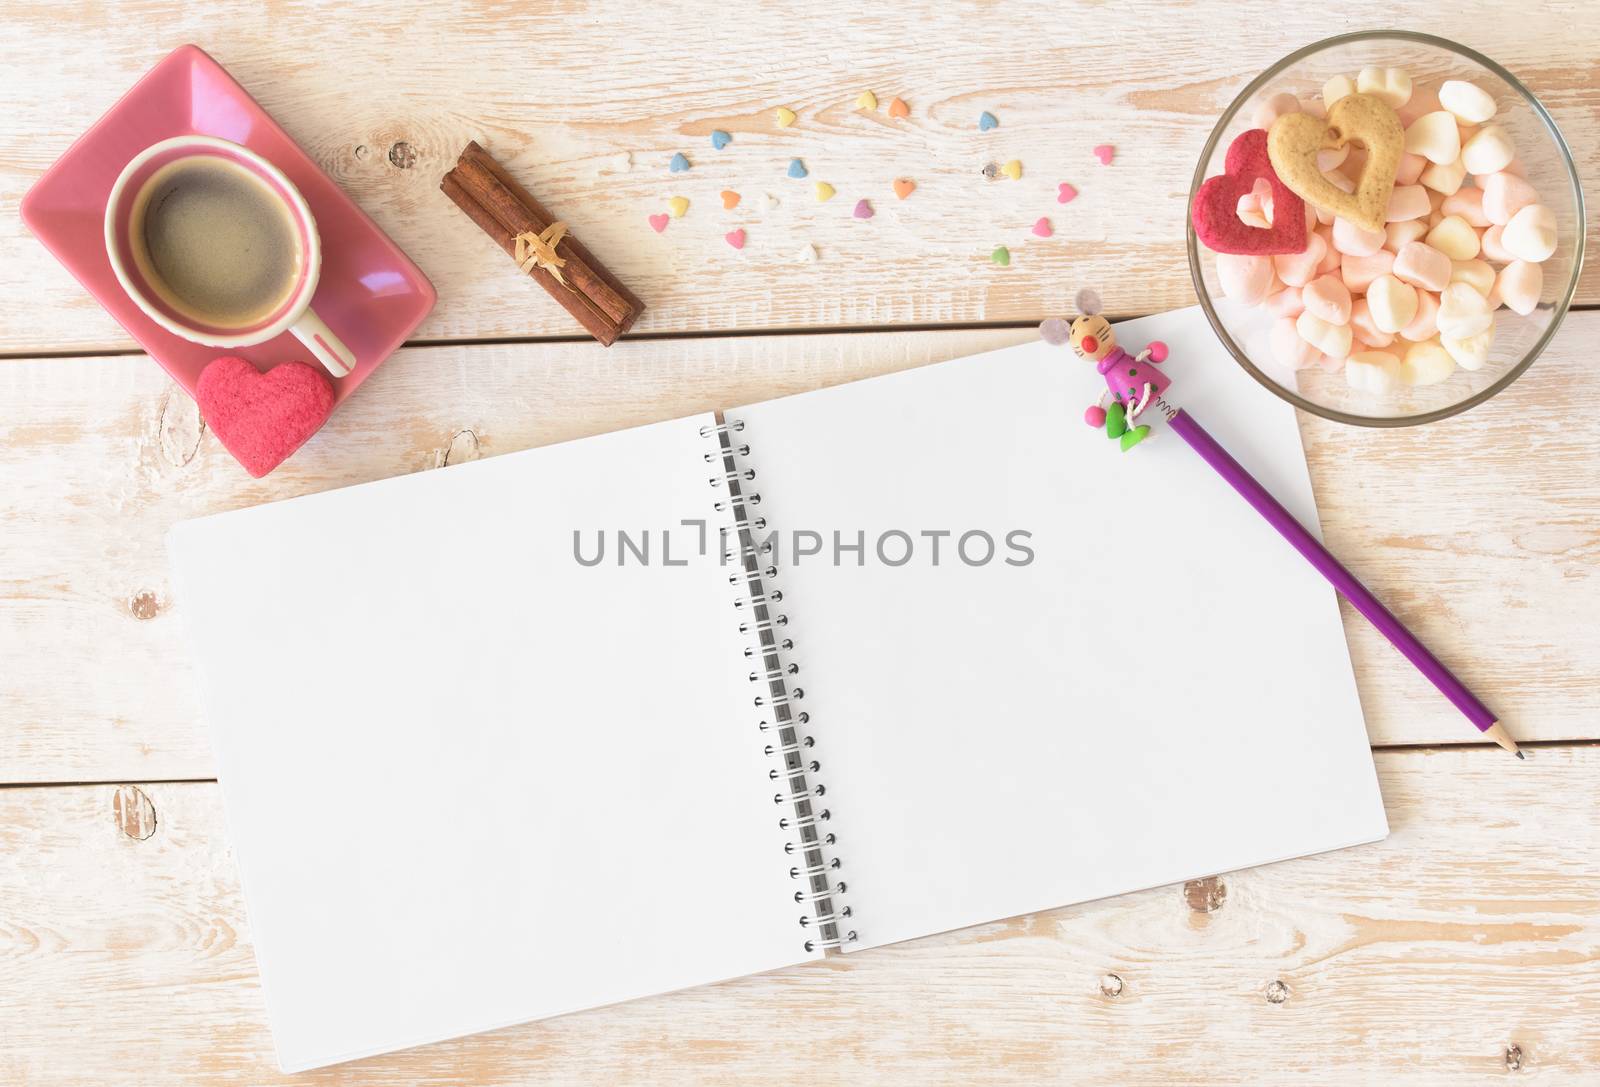 Blank paper on table. Blank sheet of paper, coffee cup, cookie, pencil on wood background. Design mockup